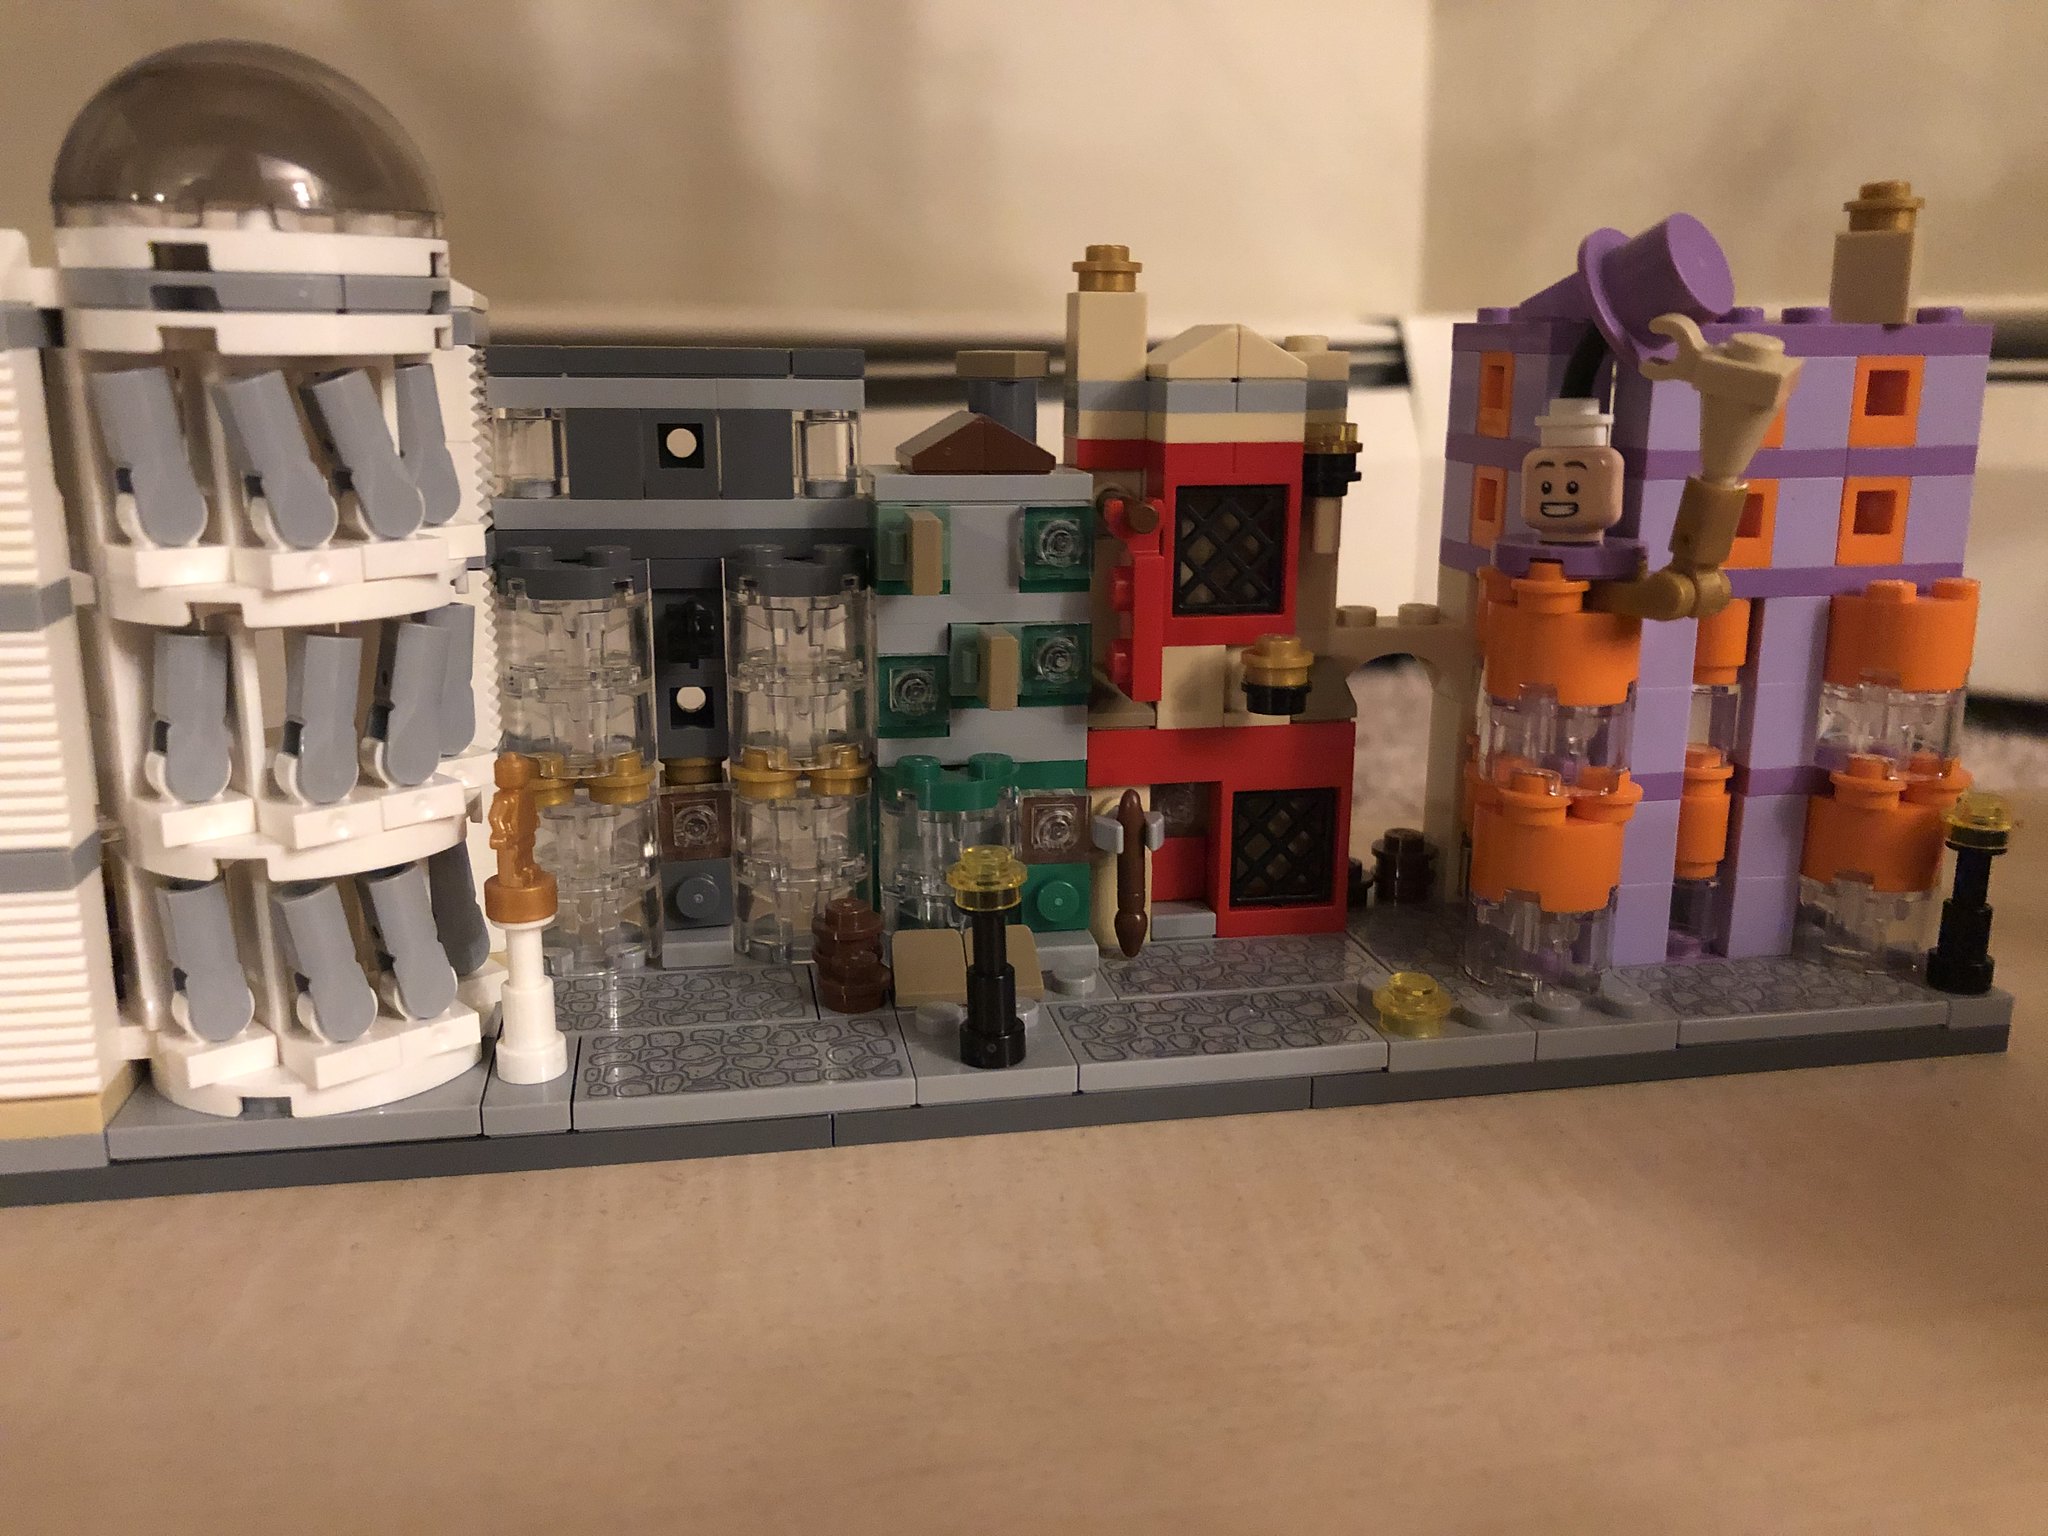 Micro scale Diagon Alley with Gringotts